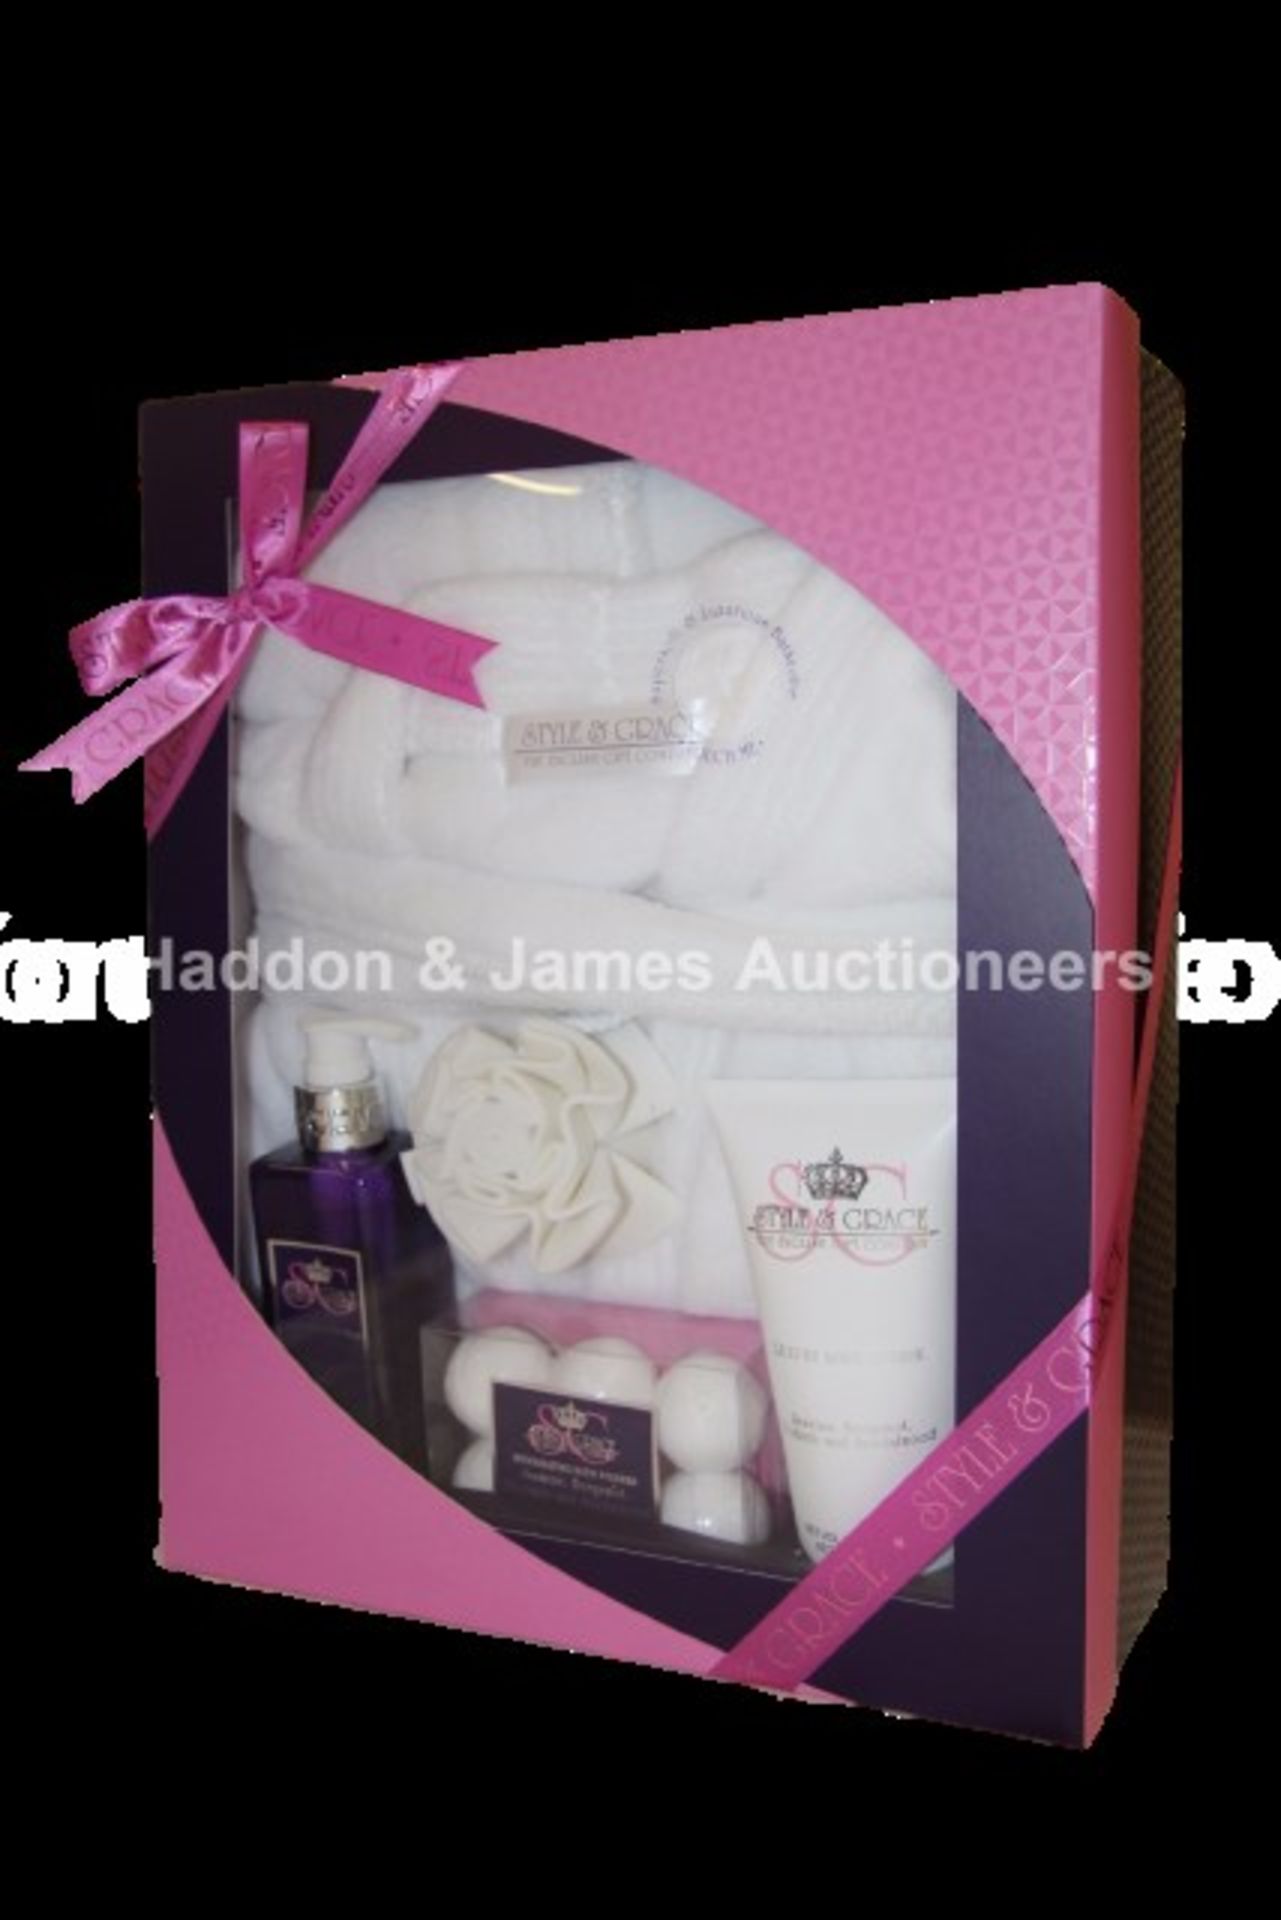 V Brand New Style & Grace Deluxe Robe Gift Set Including Bath Fizzers, Body Lotion And Body Wash